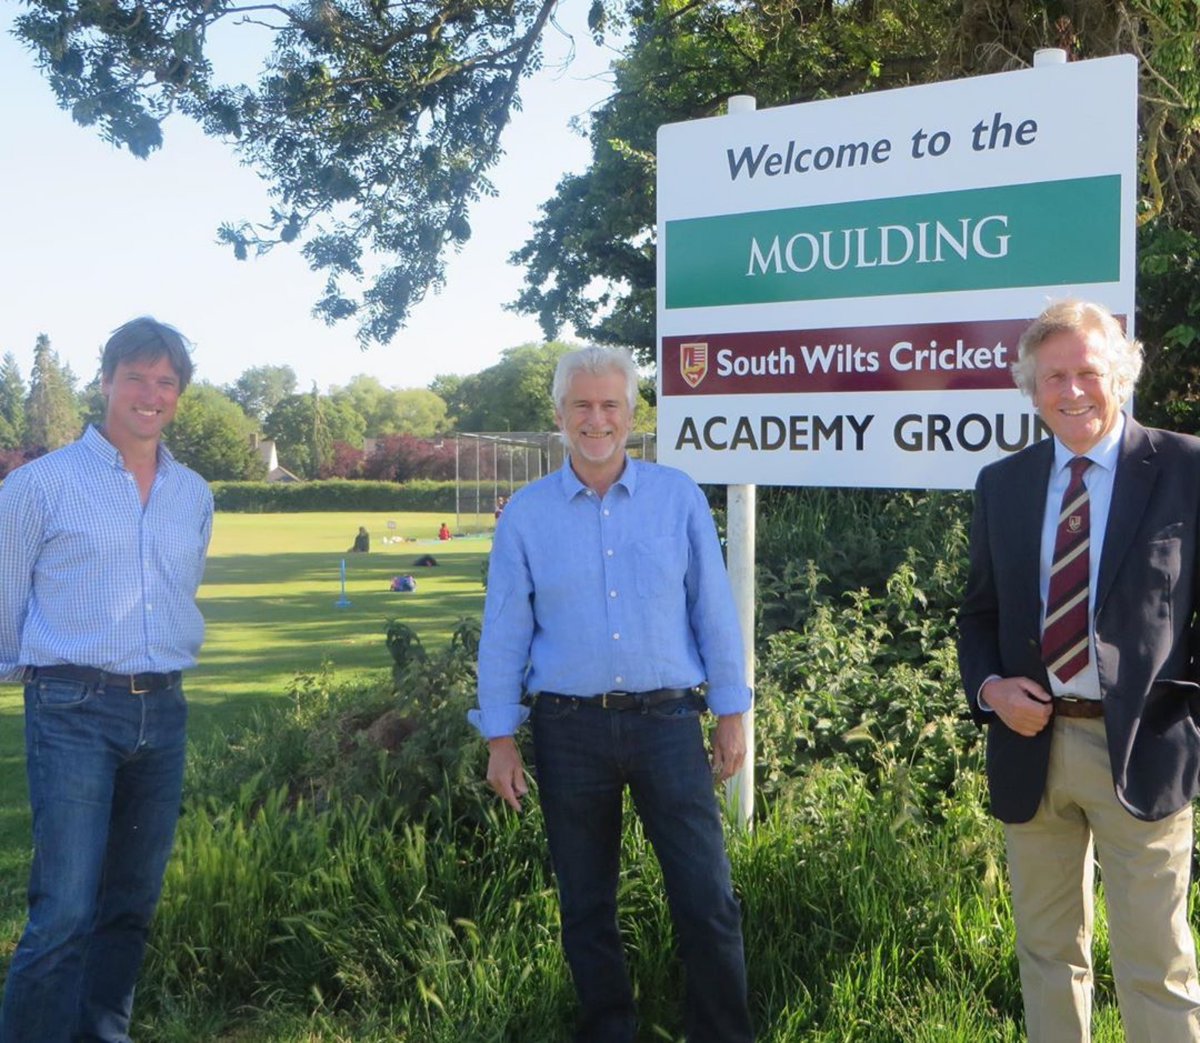 Proud to sponsor @south_wilts_cc for the 9th consecutive year. Hopefully we’ll see some cricket soon?! 

#salisbury #salisburycricketclub #cricket #socialdistancing2020 #rmouldingandco #wiltshire #wiltshirecricket #southernleaguecricket